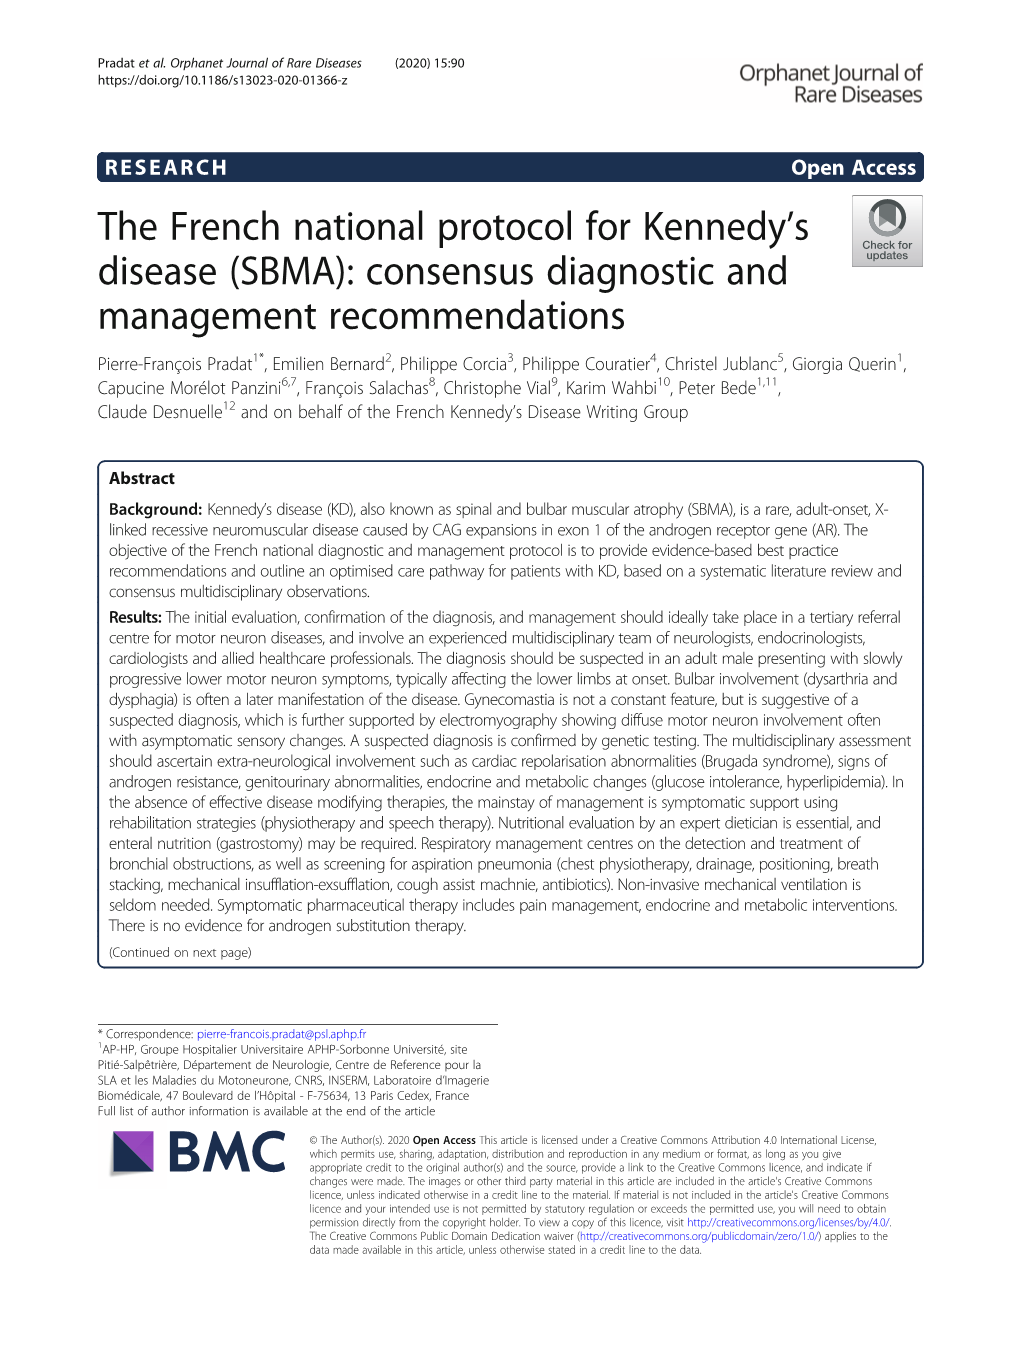 The French National Protocol for Kennedy's Disease (SBMA)